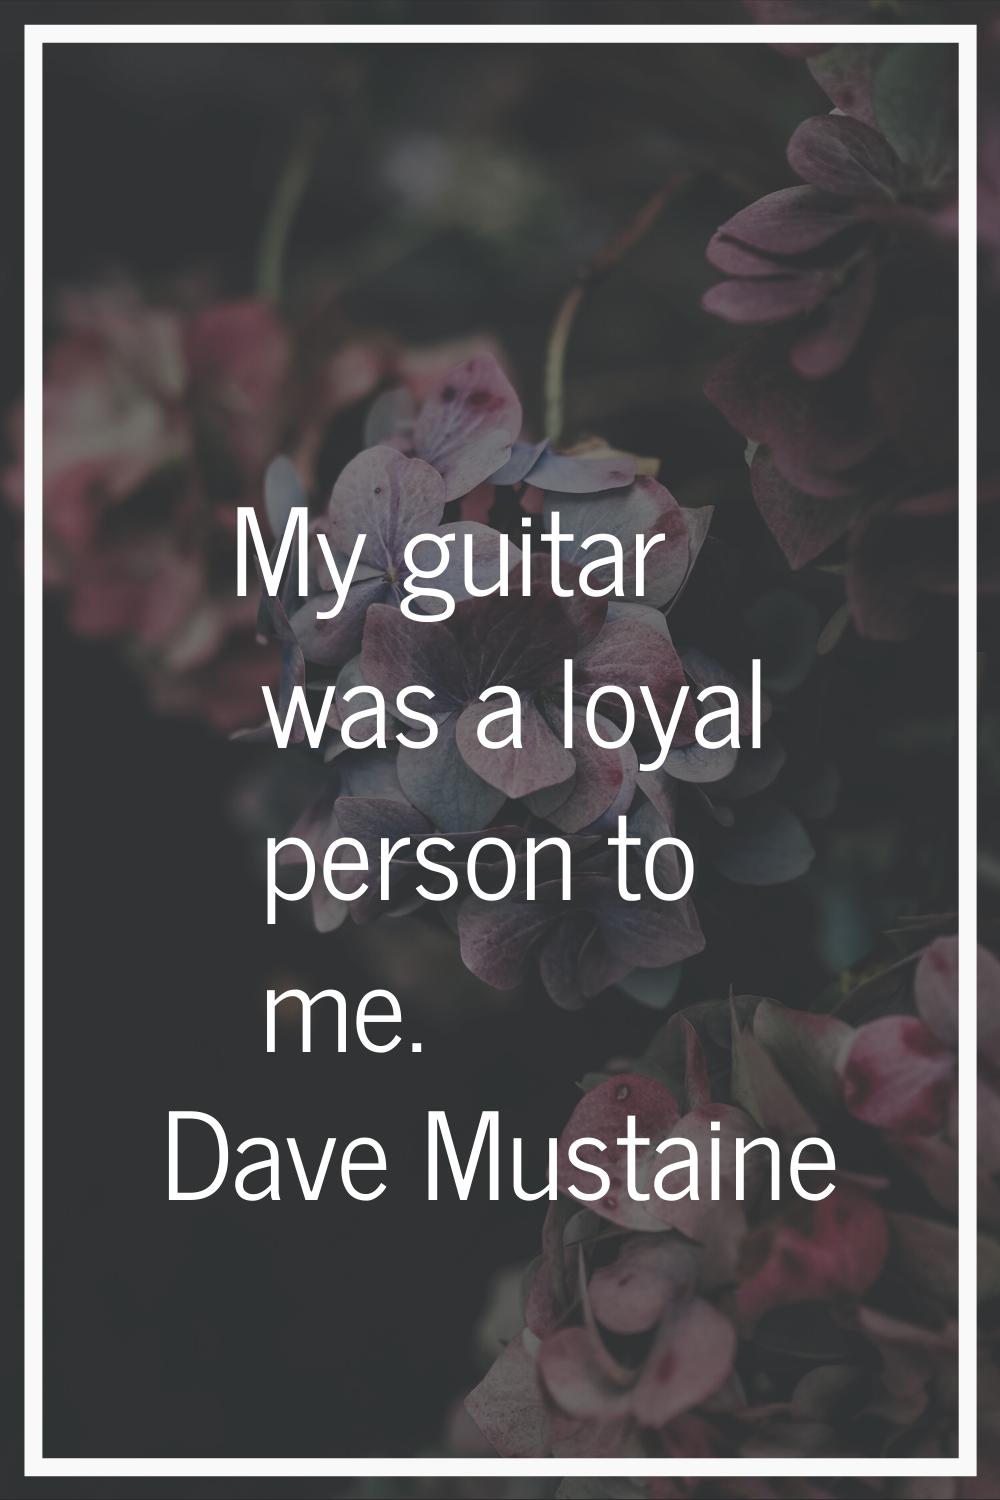 My guitar was a loyal person to me.